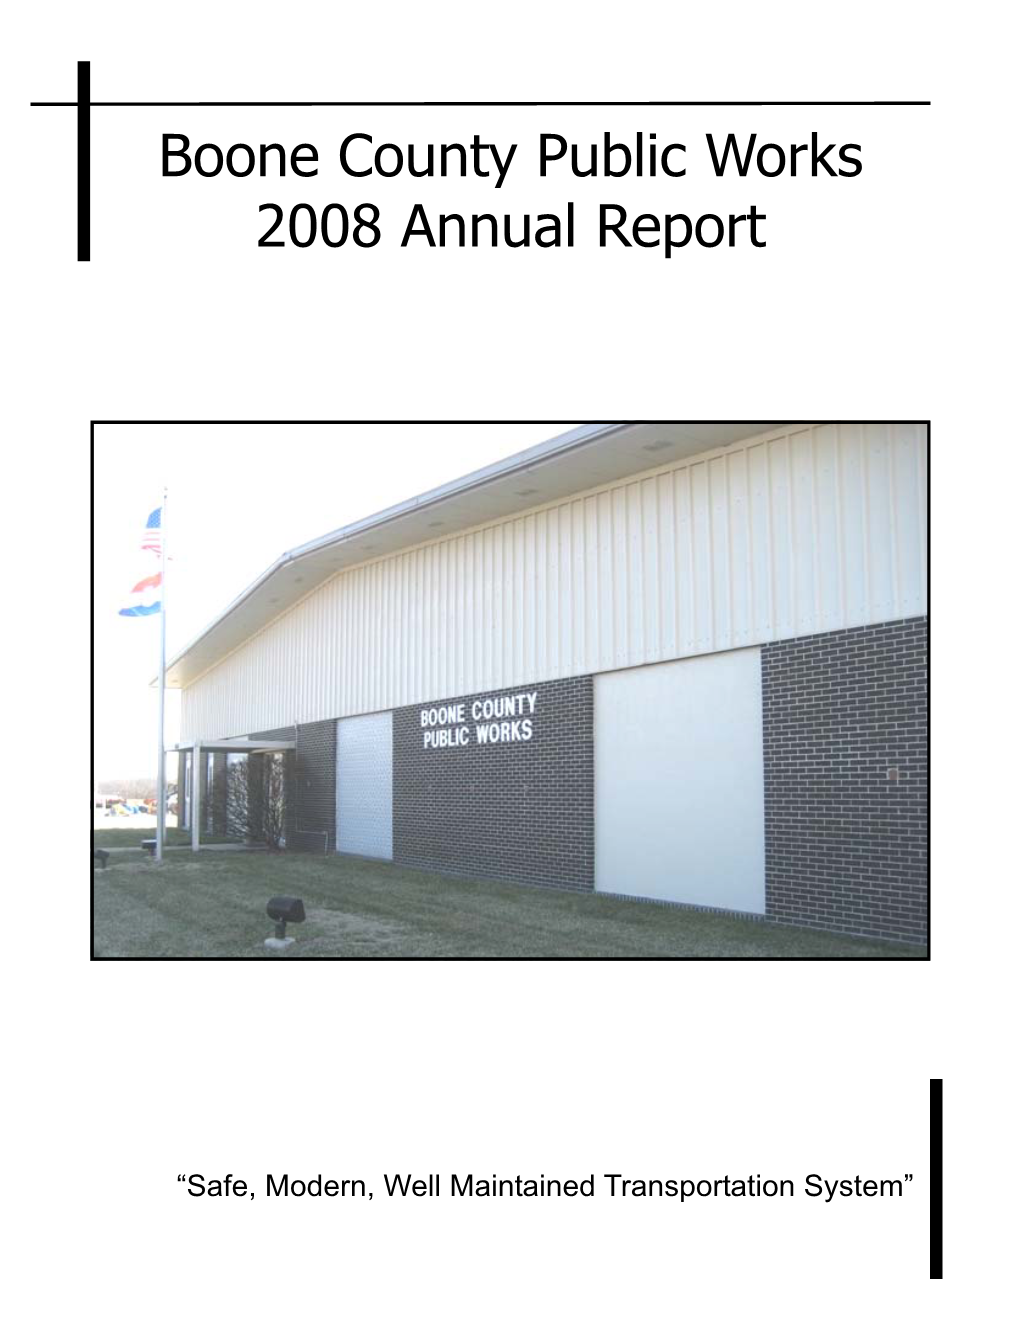 Boone County Public Works 2008 Annual Report